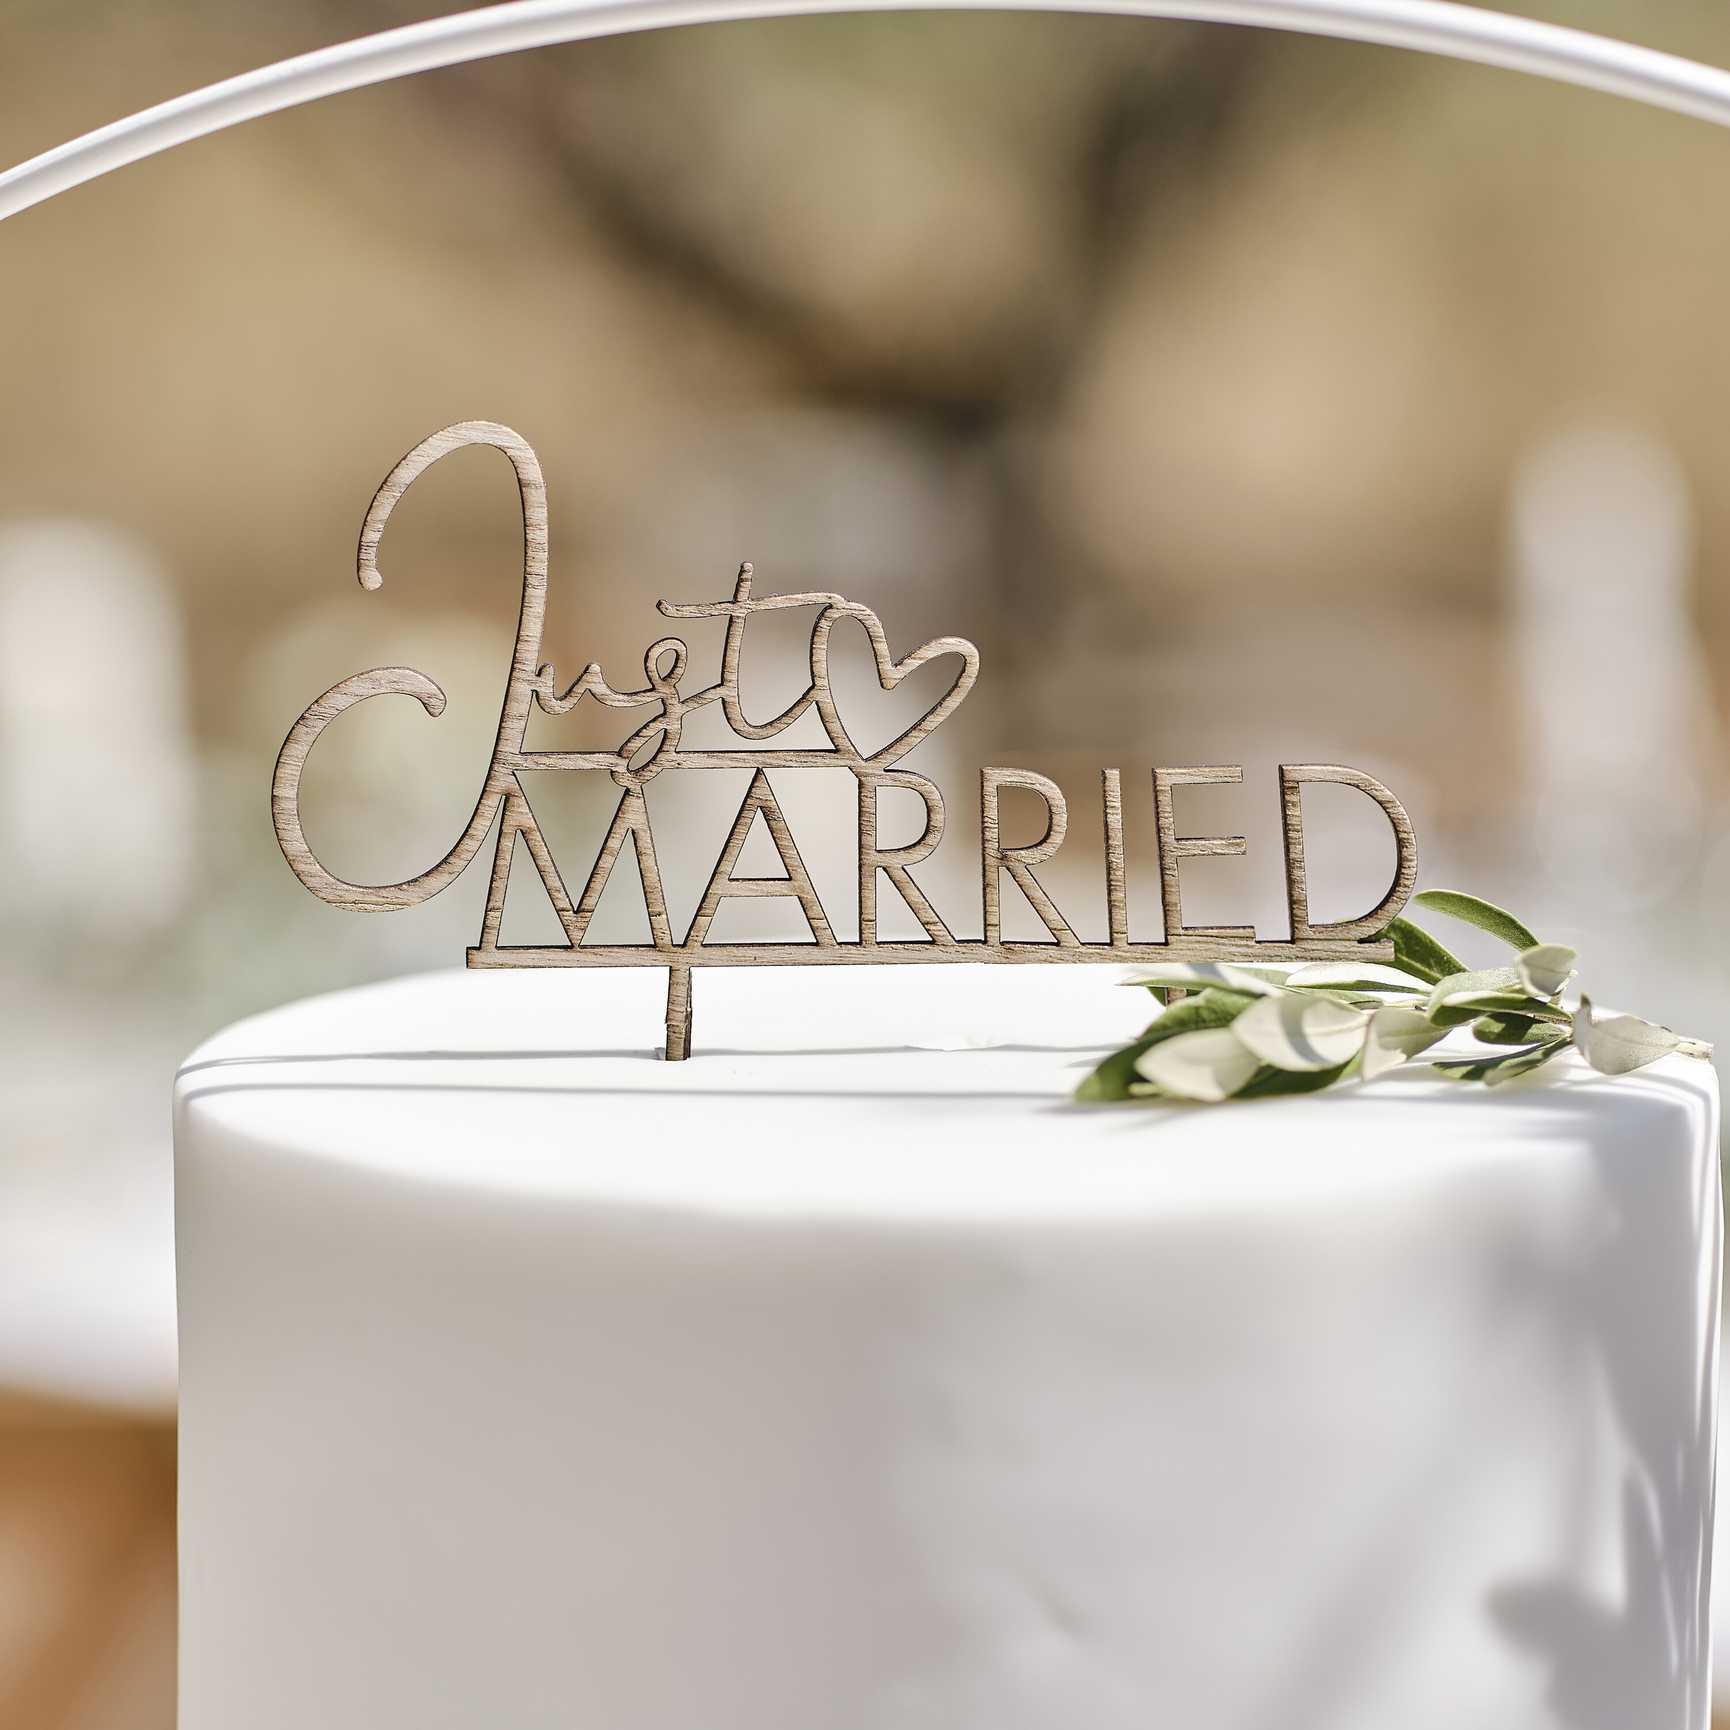 Ginger Ray Wooden Just Married Cake Topper